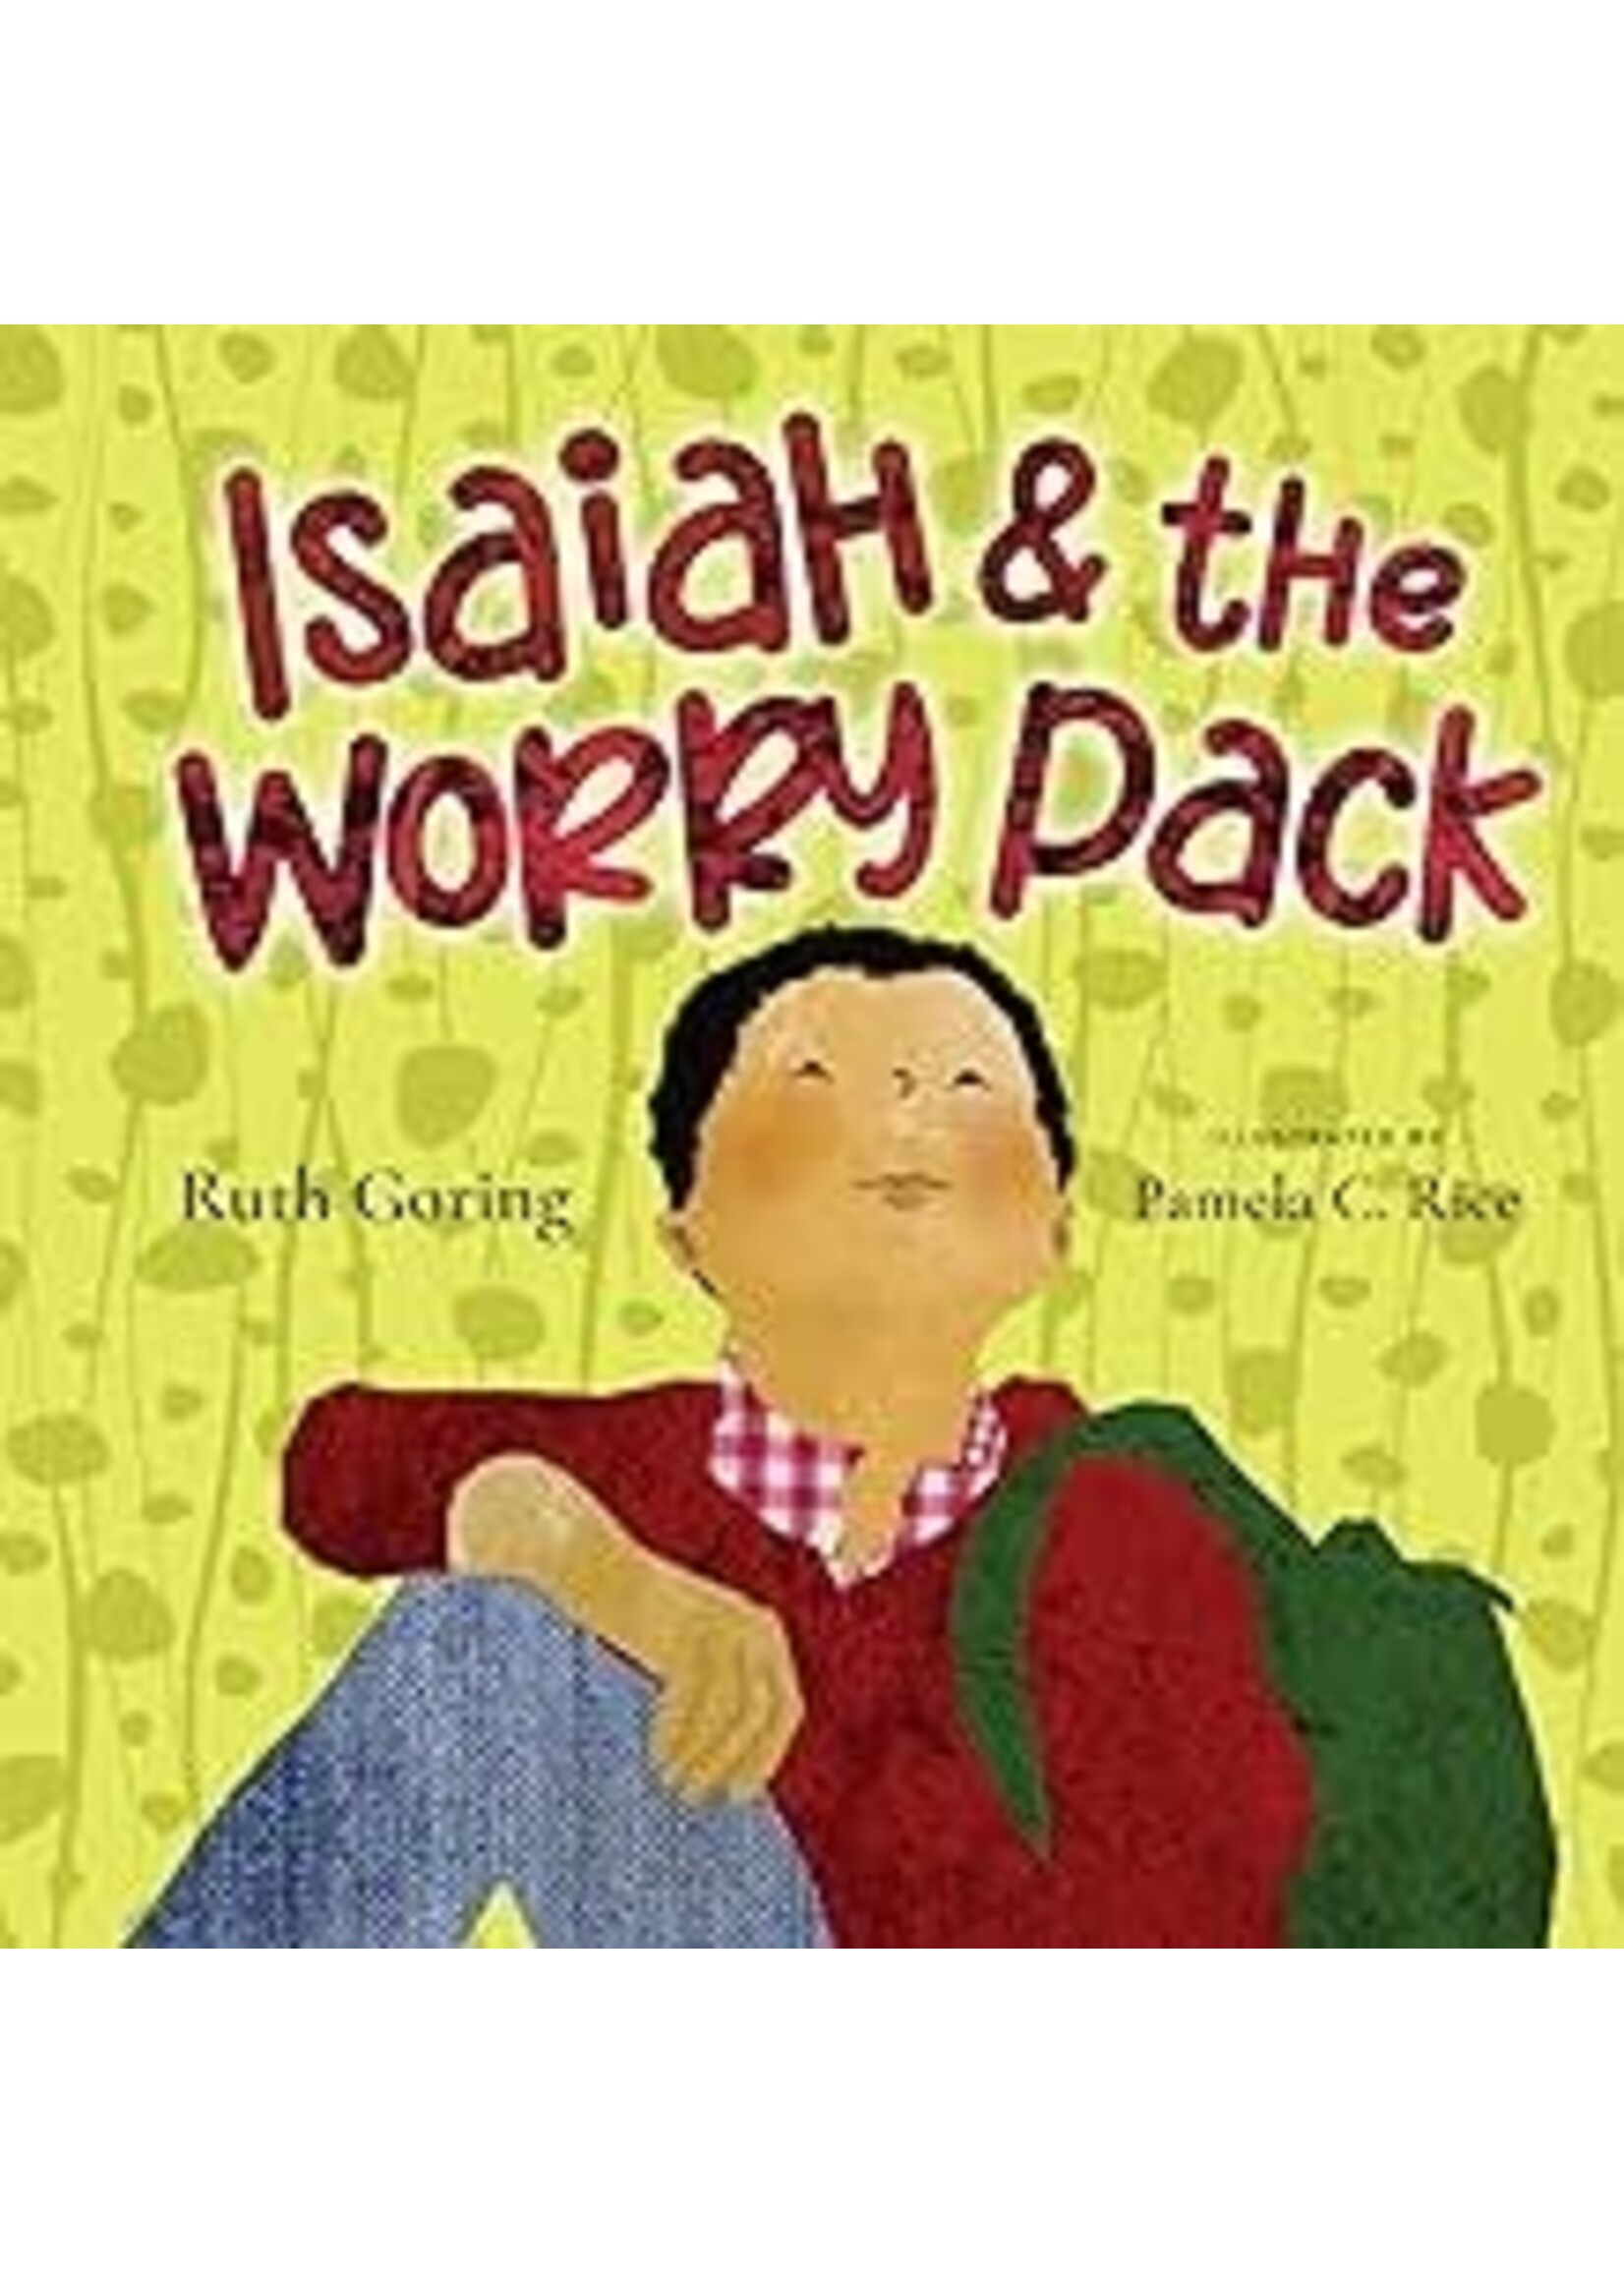 ISAIAH AND THE WORRY PACK